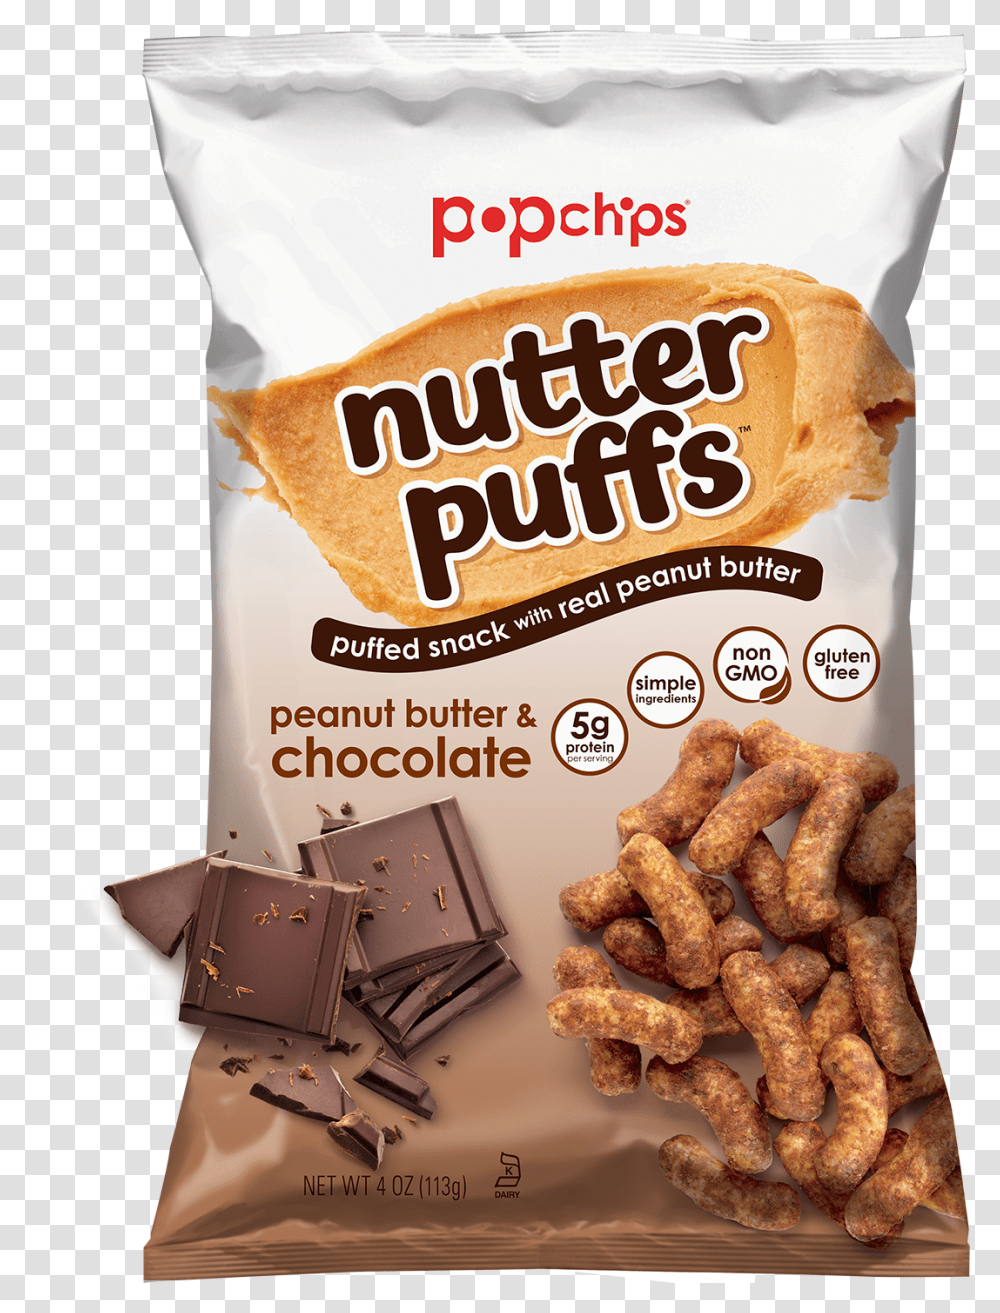 Bag Of Peanut Butter And Chocolate Nutter Puffs Popchips Peanut Butter Nutter Puffs, Food, Dessert, Fudge, Cocoa Transparent Png